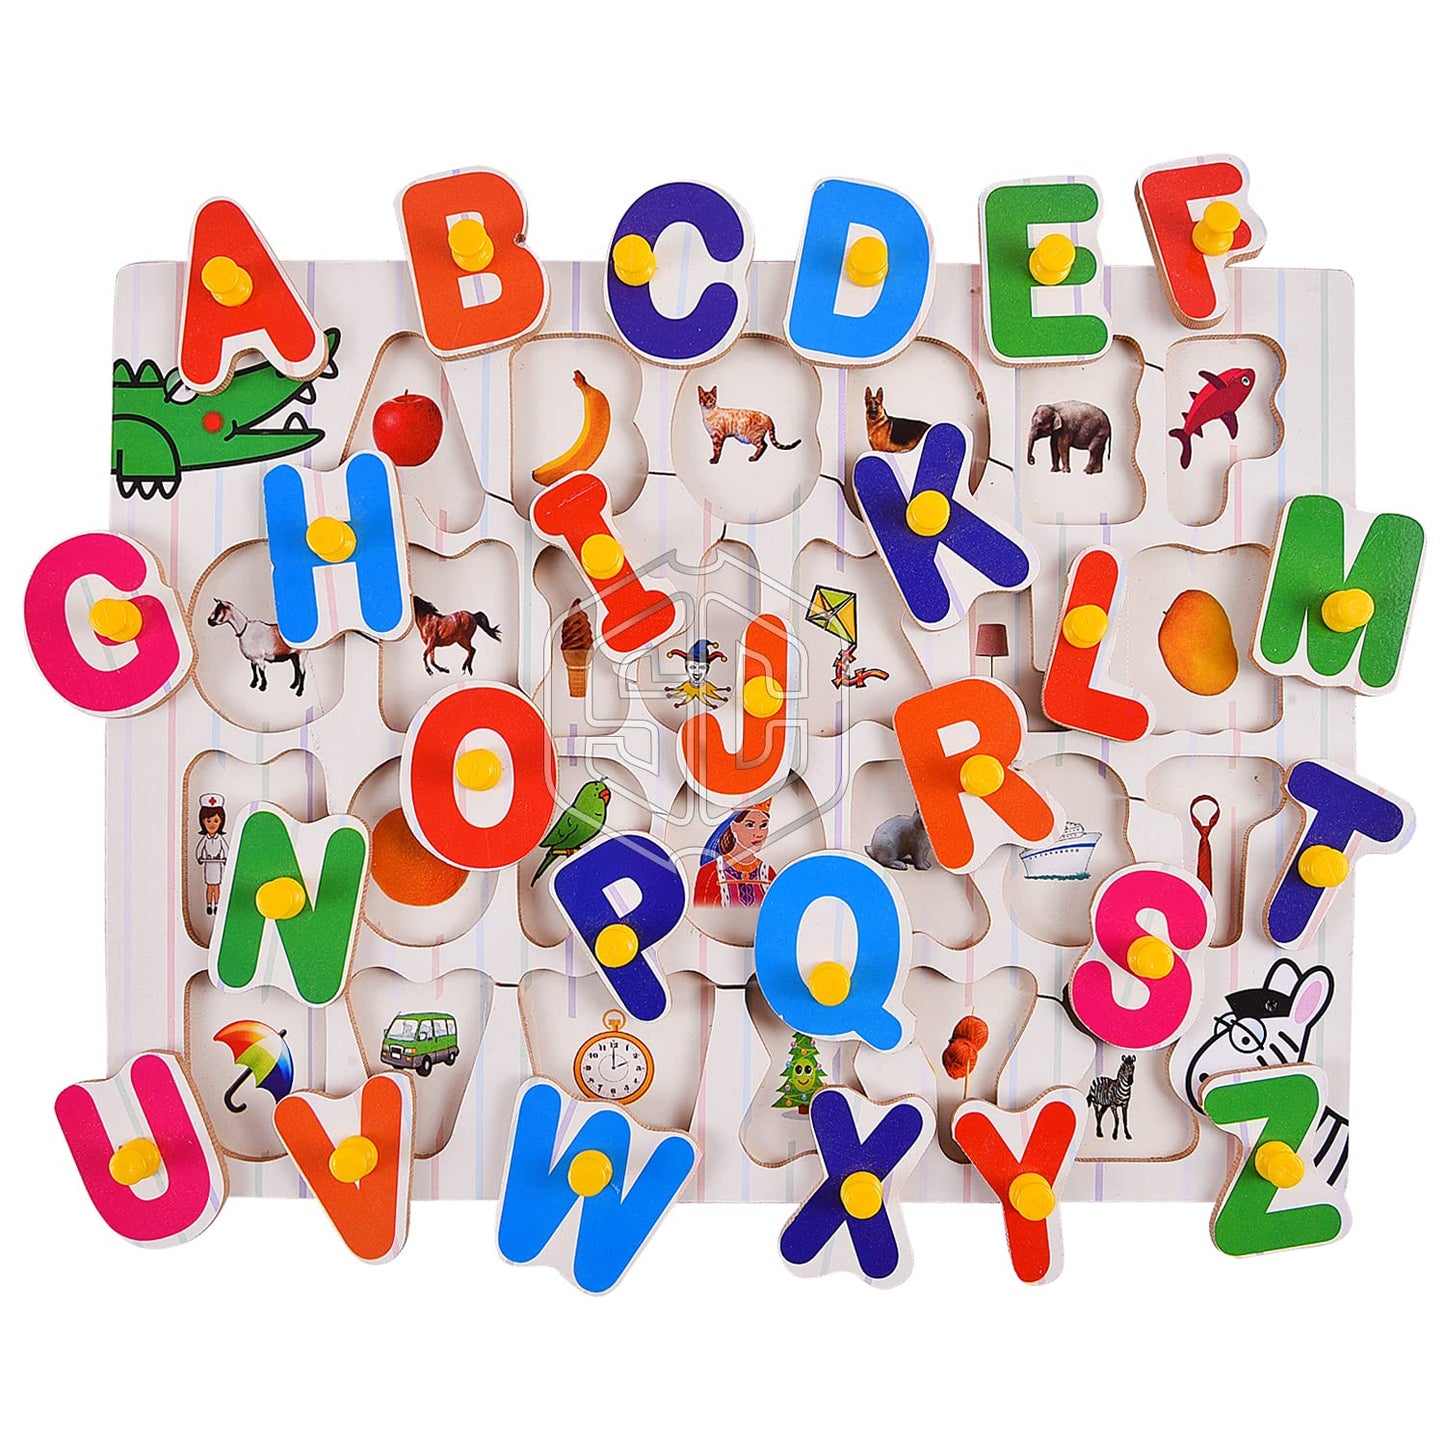 Wooden Capital Alphabet Puzzles, 3d Wooden Capital Alphabet Puzzles With Pictures For Children Educational Learning Letters Puzzle Board Toy